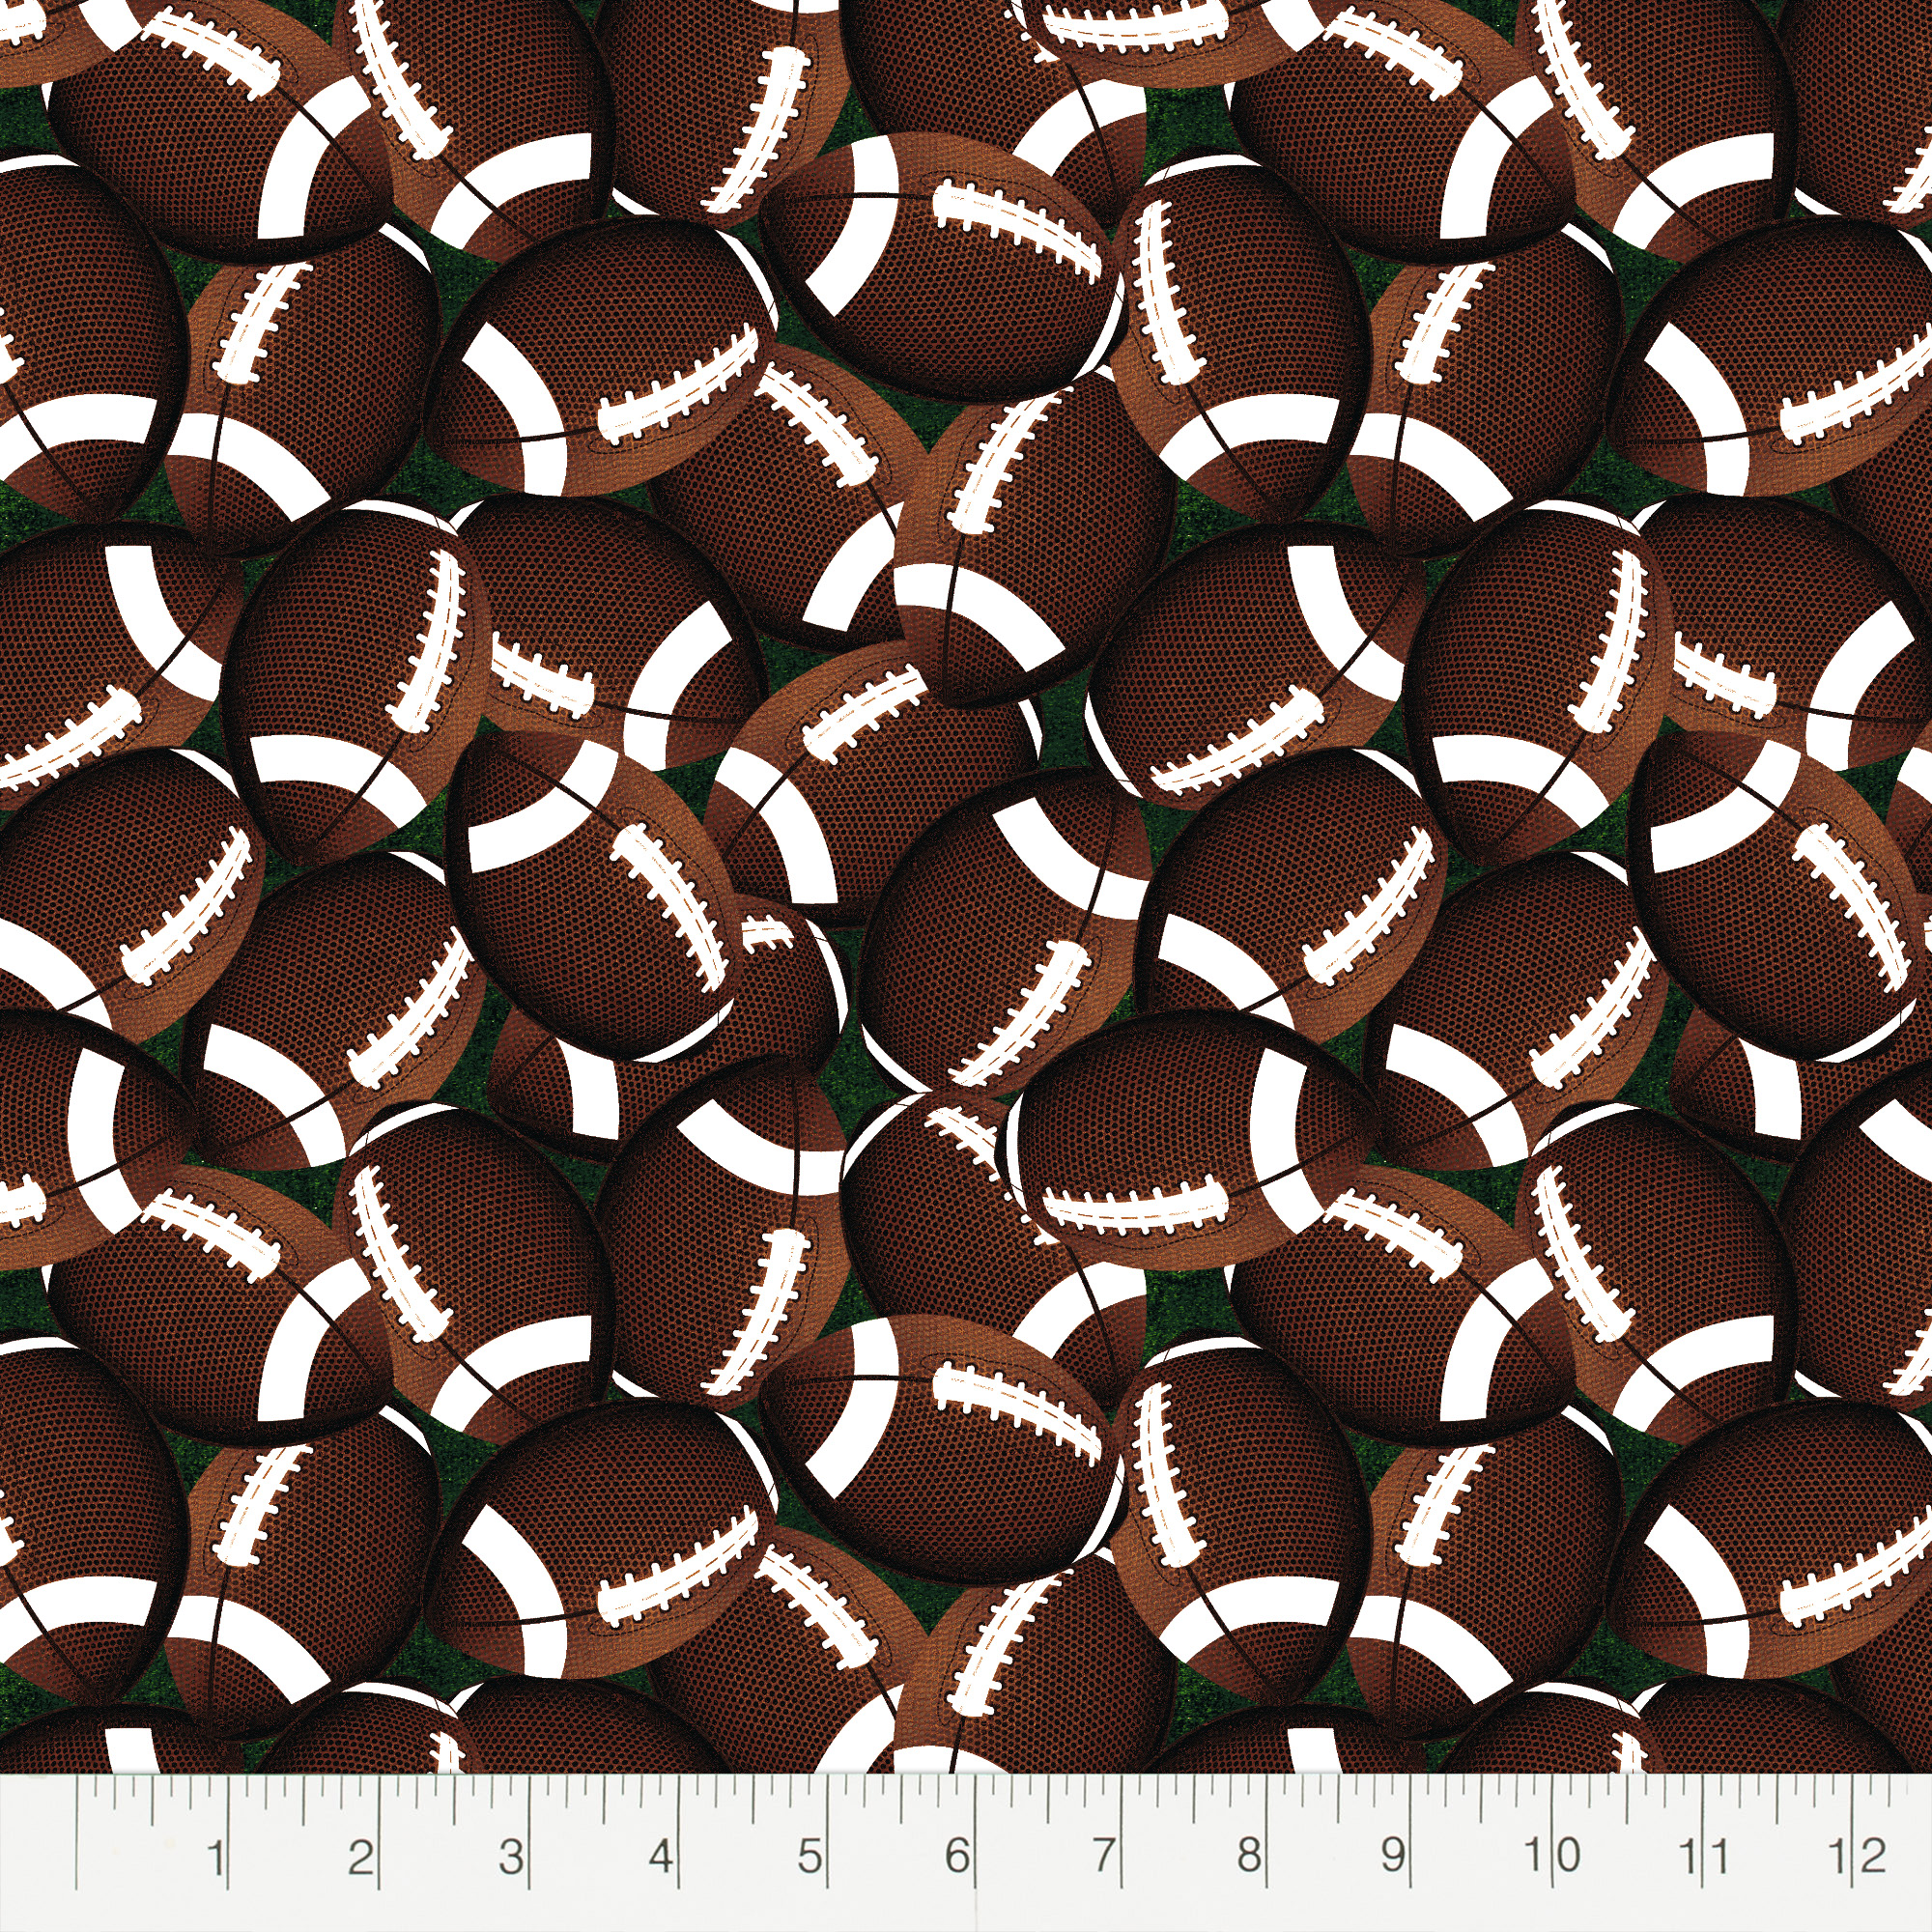 Fabric Editions Creative Cuts 18"x21" Cotton Football Precut Sewing & Craft Fabric, Green 10 Pieces - image 5 of 6